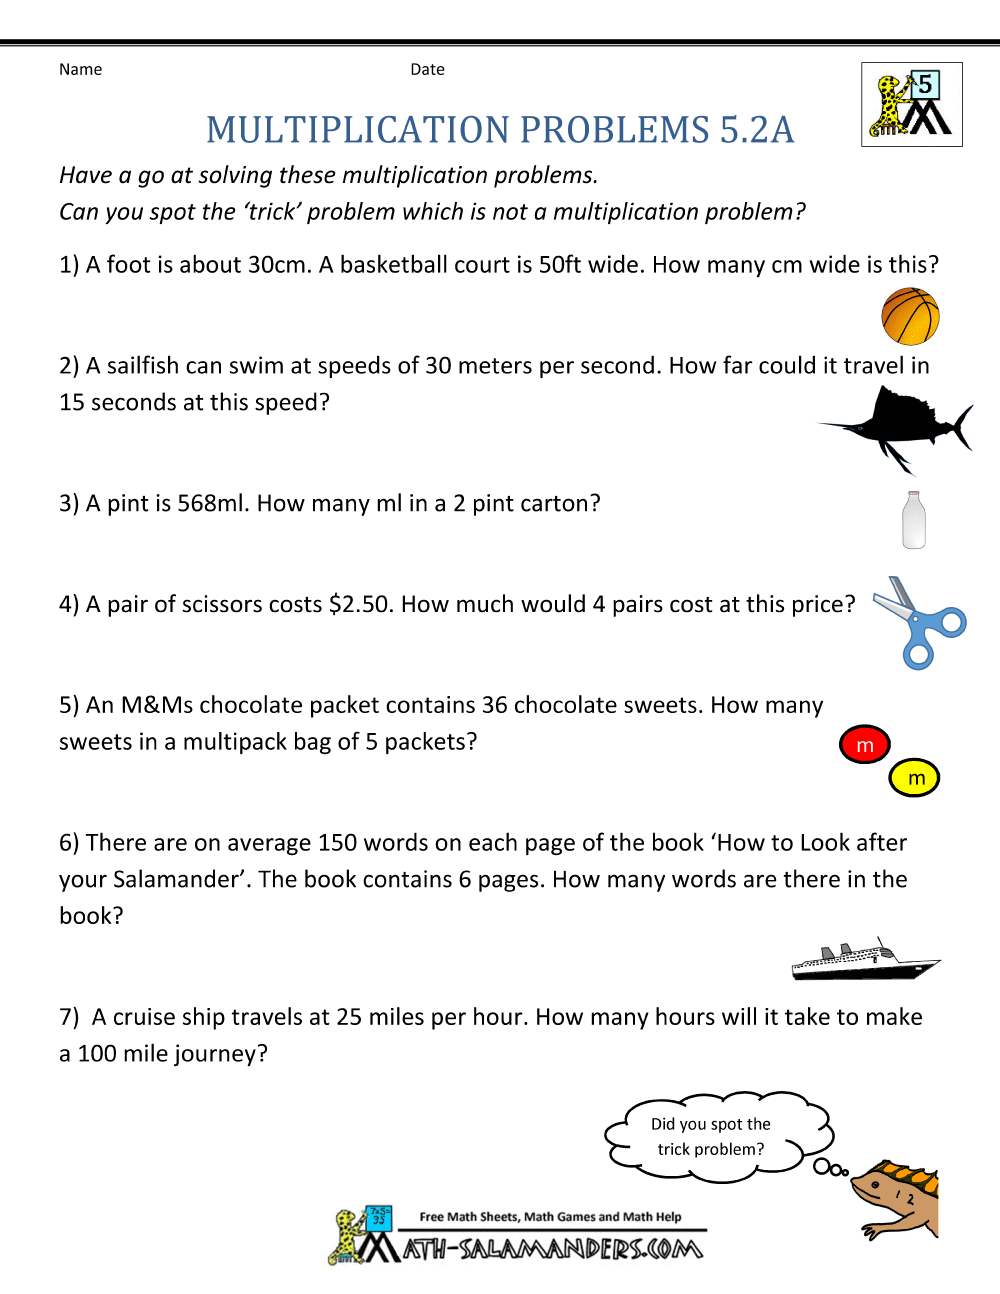 problem solving questions year 5 maths